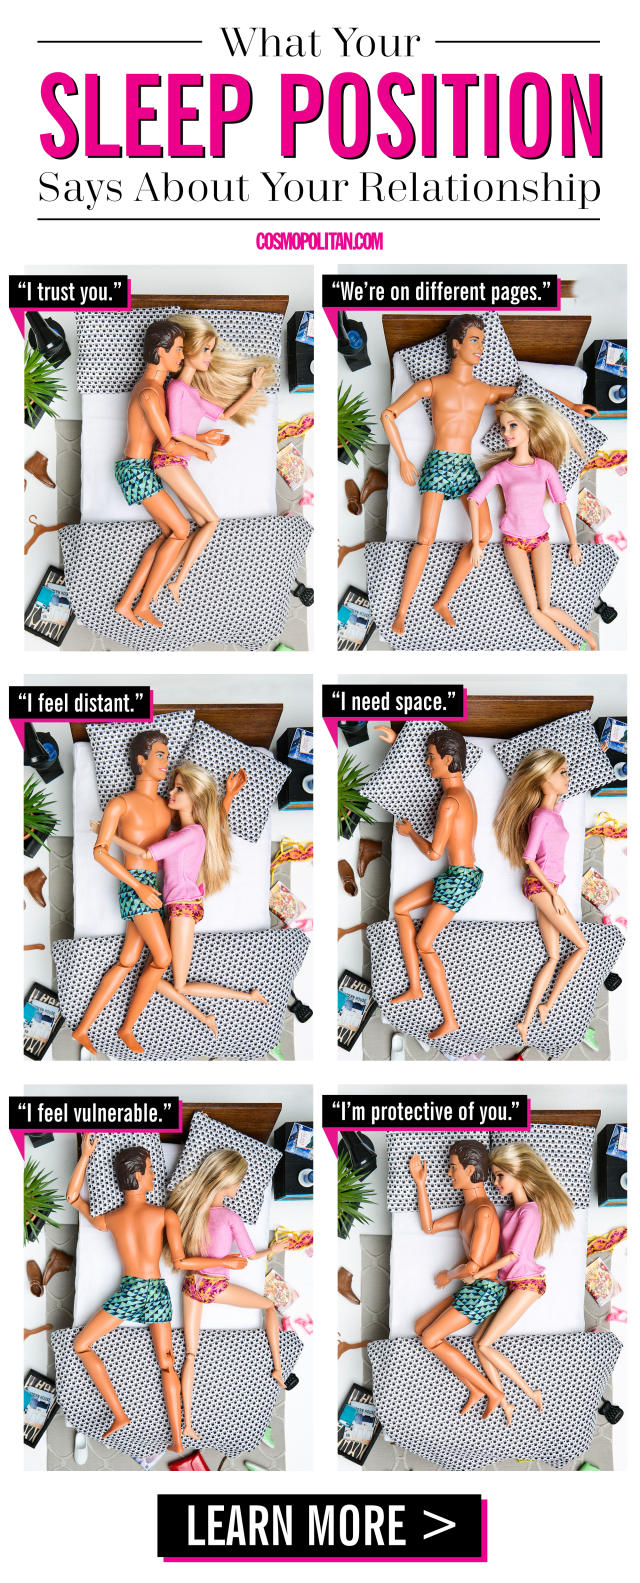 What Are the Best Sleeping Positions? You May Be Surprised